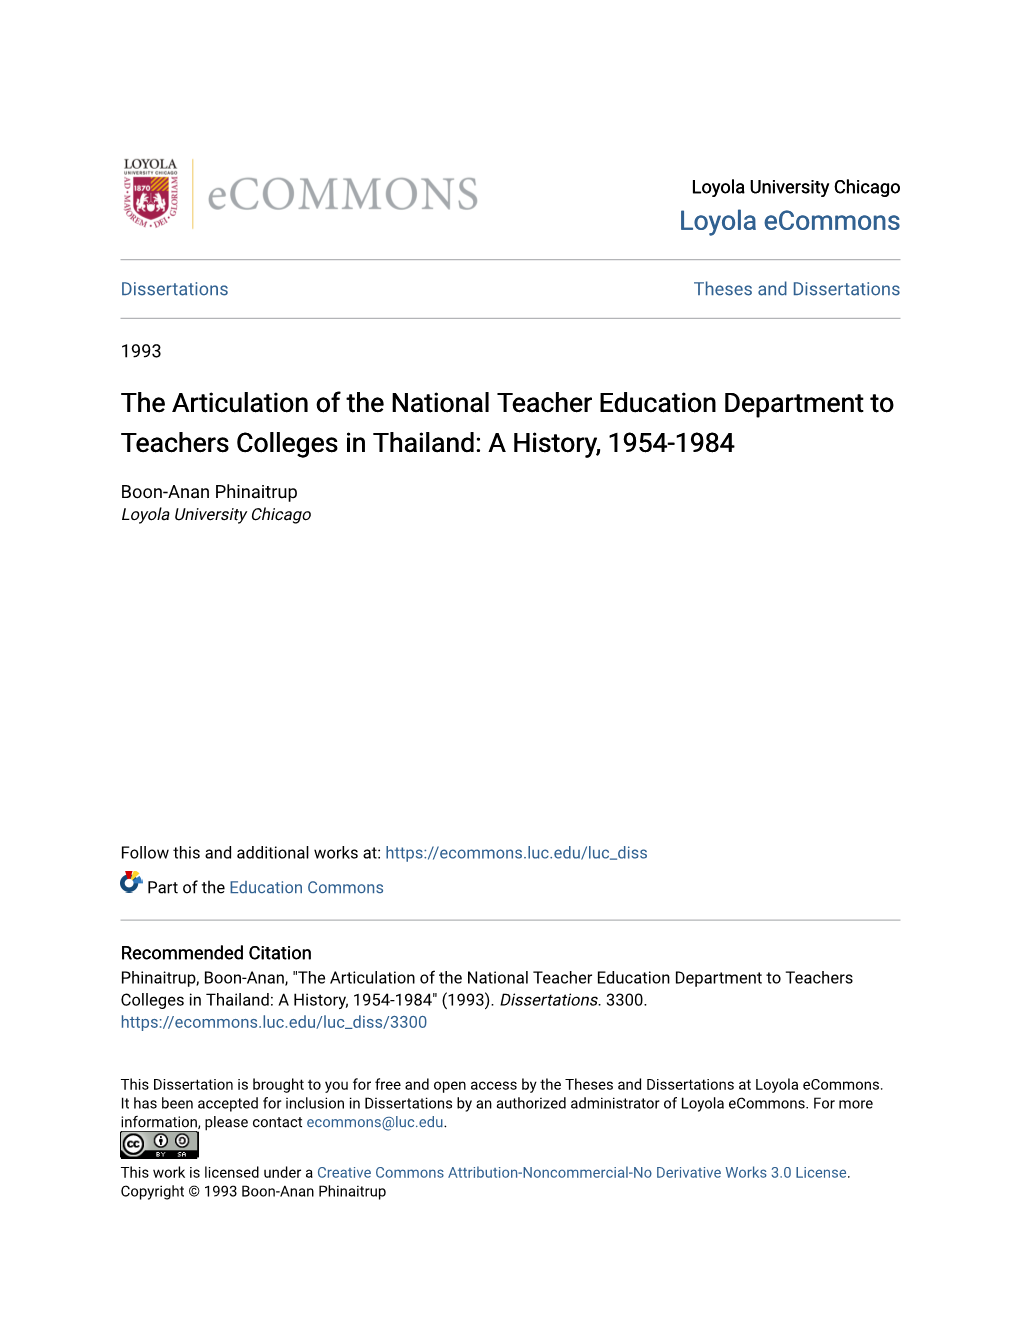 The Articulation of the National Teacher Education Department to Teachers Colleges in Thailand: a History, 1954-1984